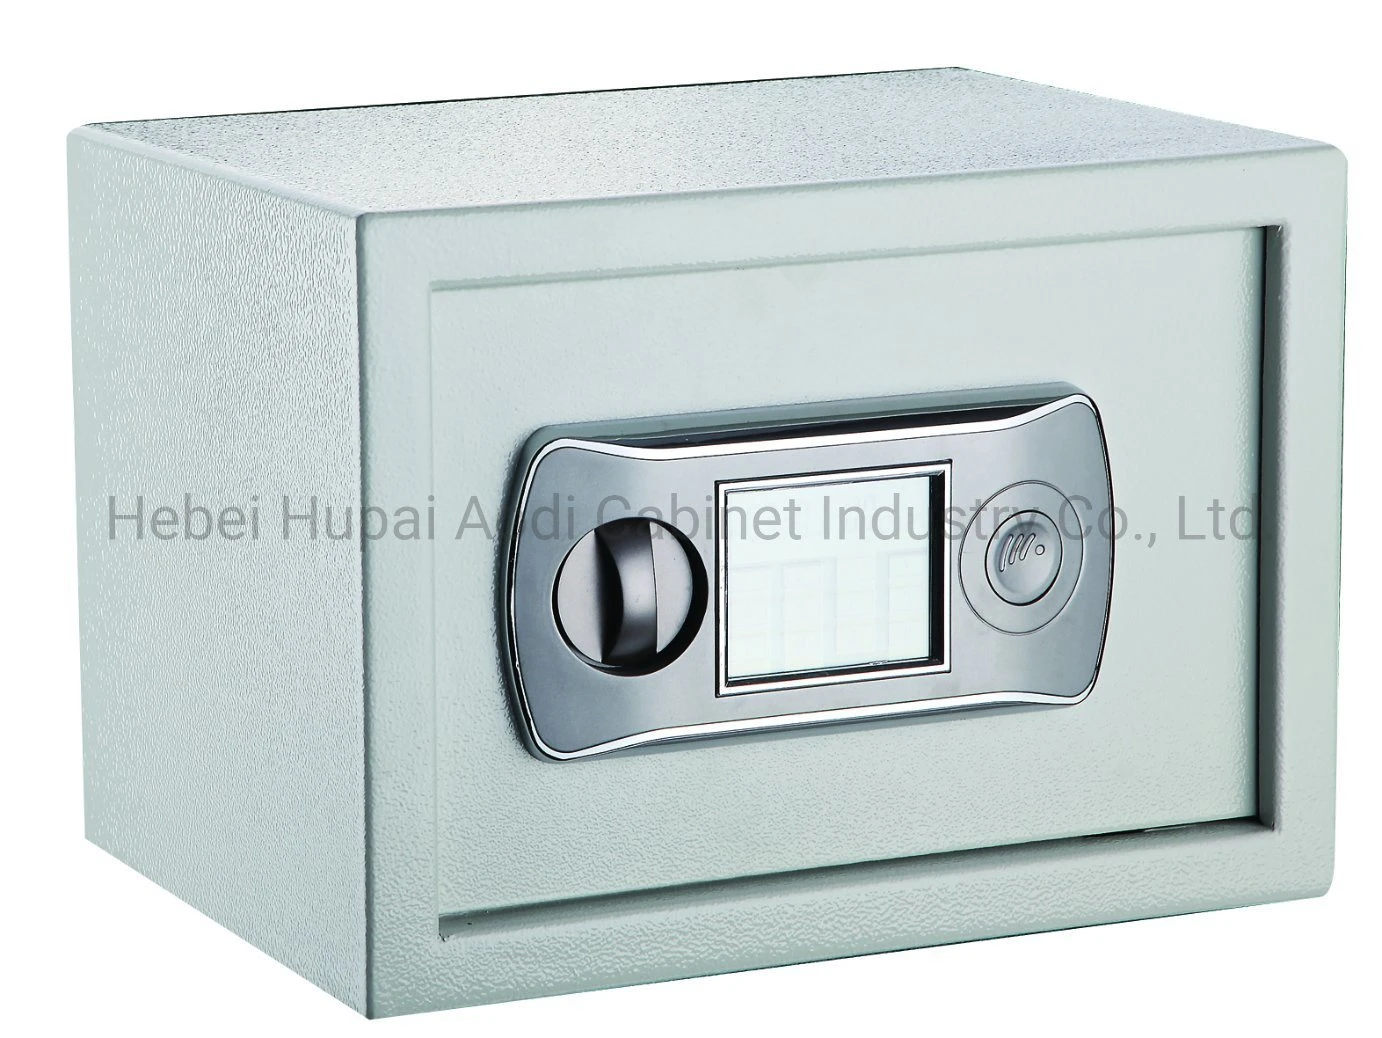 Wholesale New Product Home LCD Electronic Safe